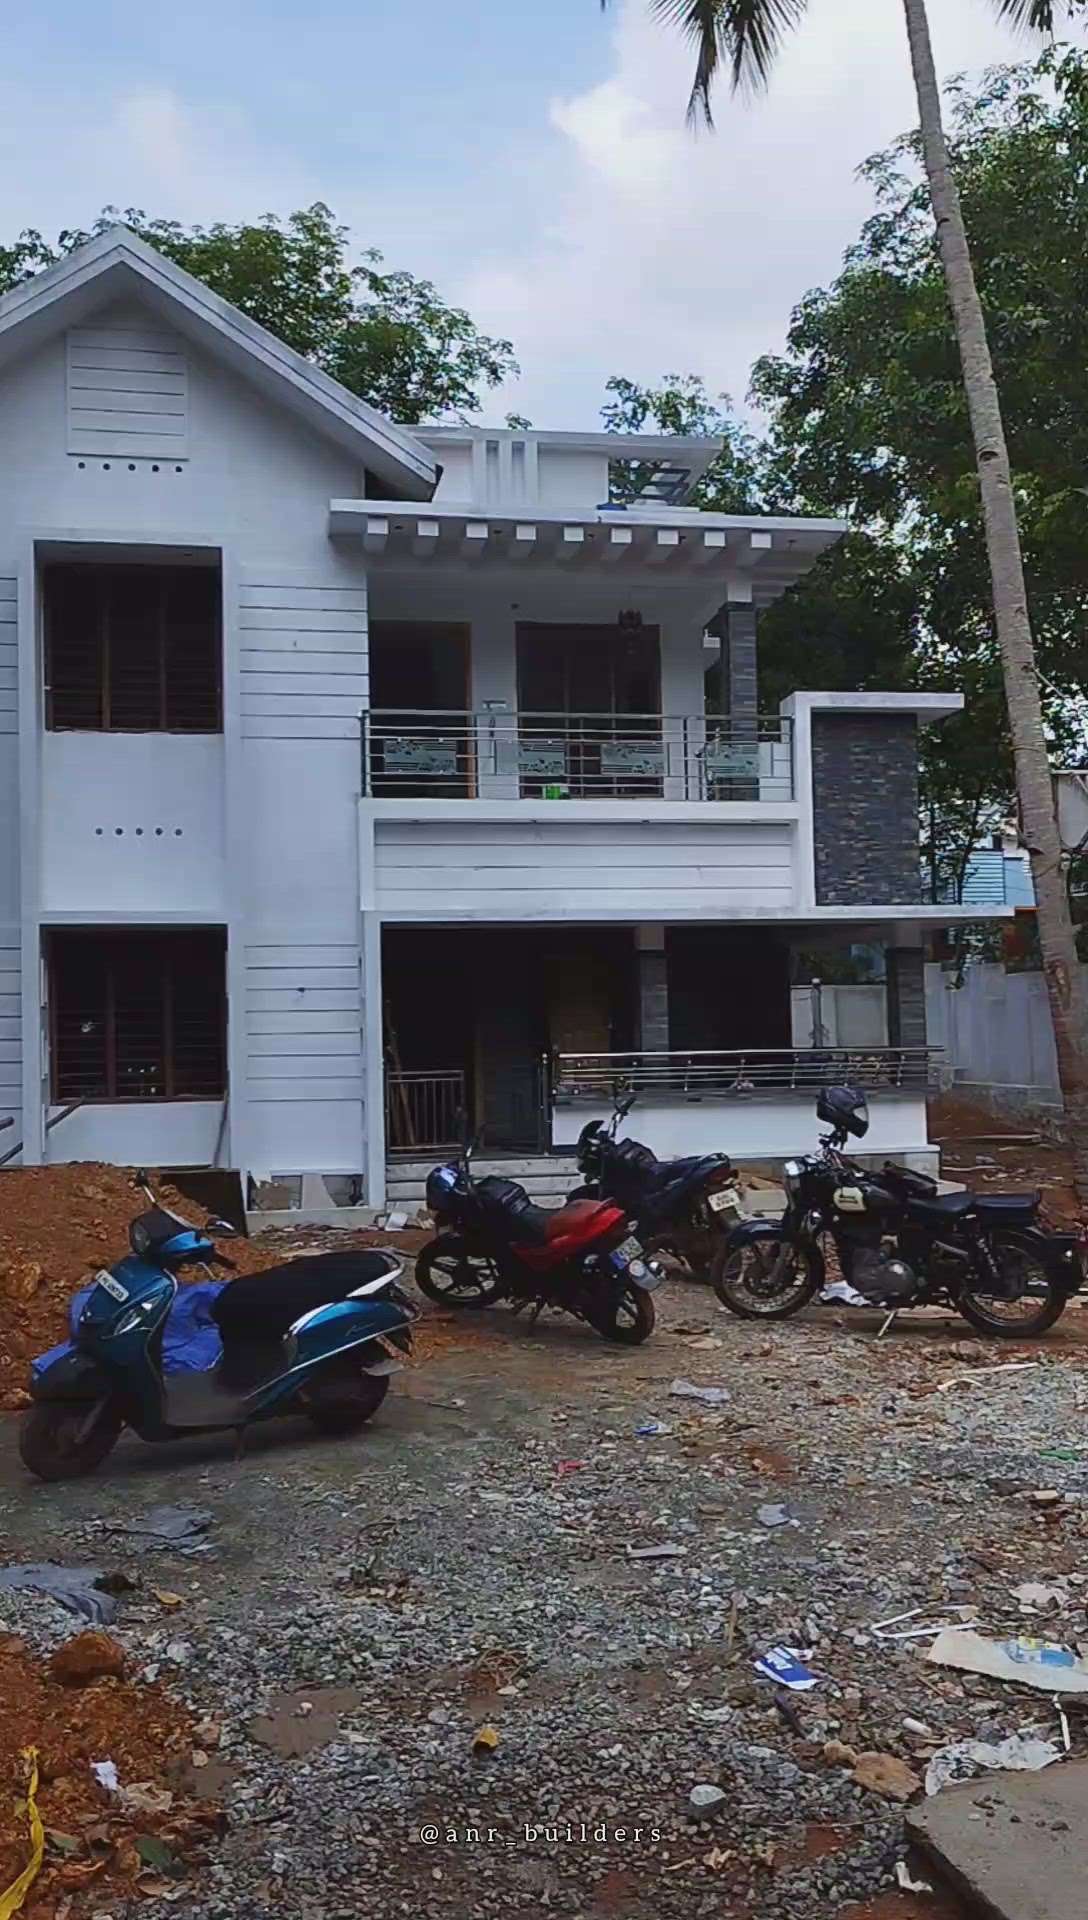 ANR BUILDERS AND DESIGNERS 🏠
@anr_builders

We are here to build homes of your dreams♥️
 Client : Sreejith S Nair
 Location : Panavely
 Designed by:@anandhu_nath.r

#construction #housedesign #keralahouses
#keralahomeplanners#architect
#plan #veedu #architecture #brick
#architect #civilengineering
#home#homedesigning #housedesign
#acrchitecture #keralahomedesigns #homelover